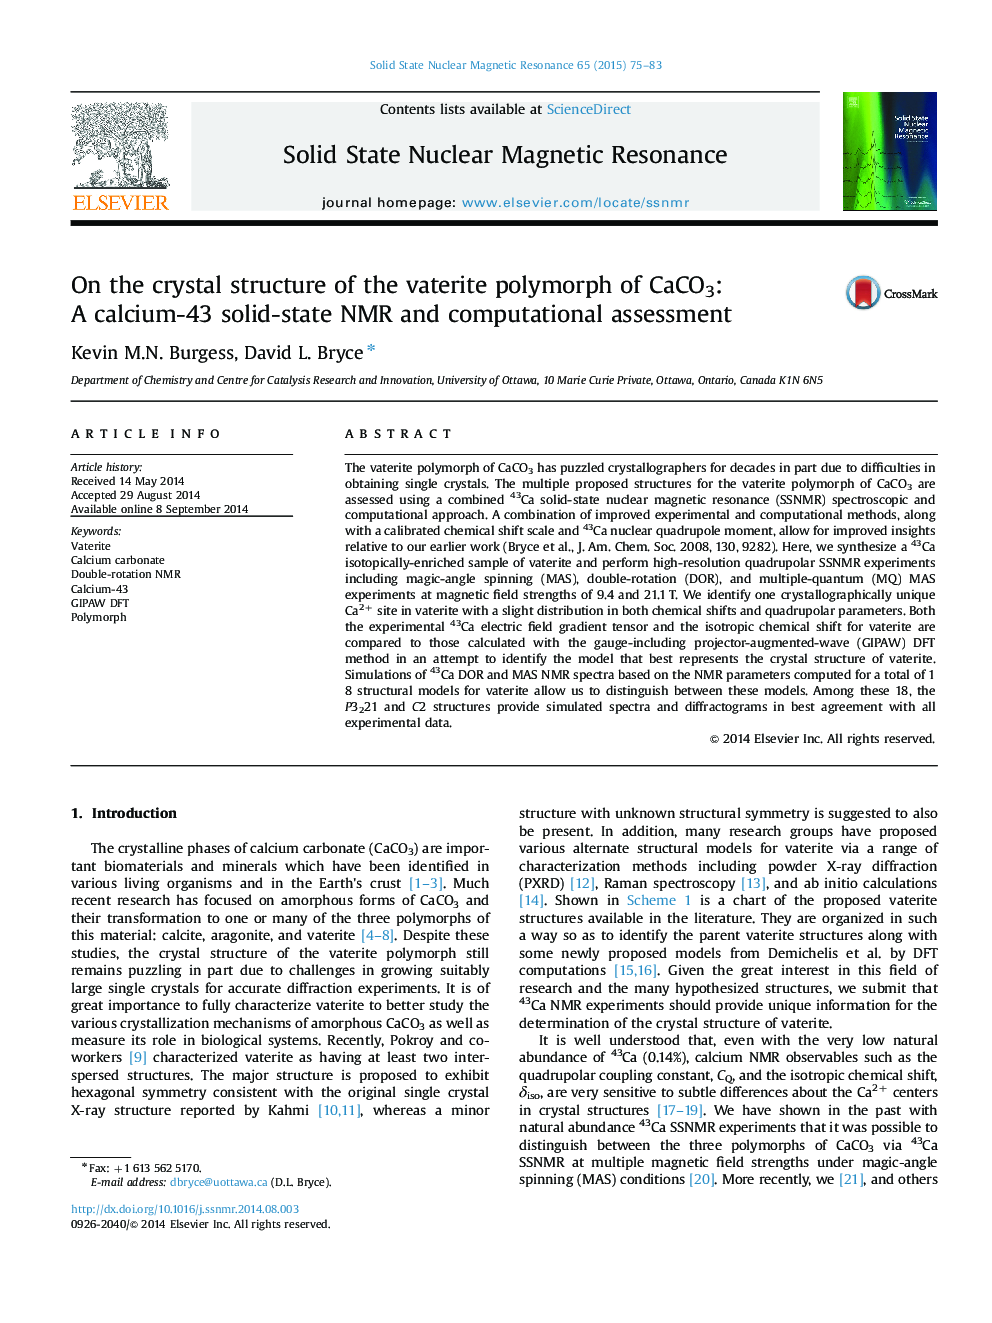 On the crystal structure of the vaterite polymorph of CaCO3: A calcium-43 solid-state NMR and computational assessment